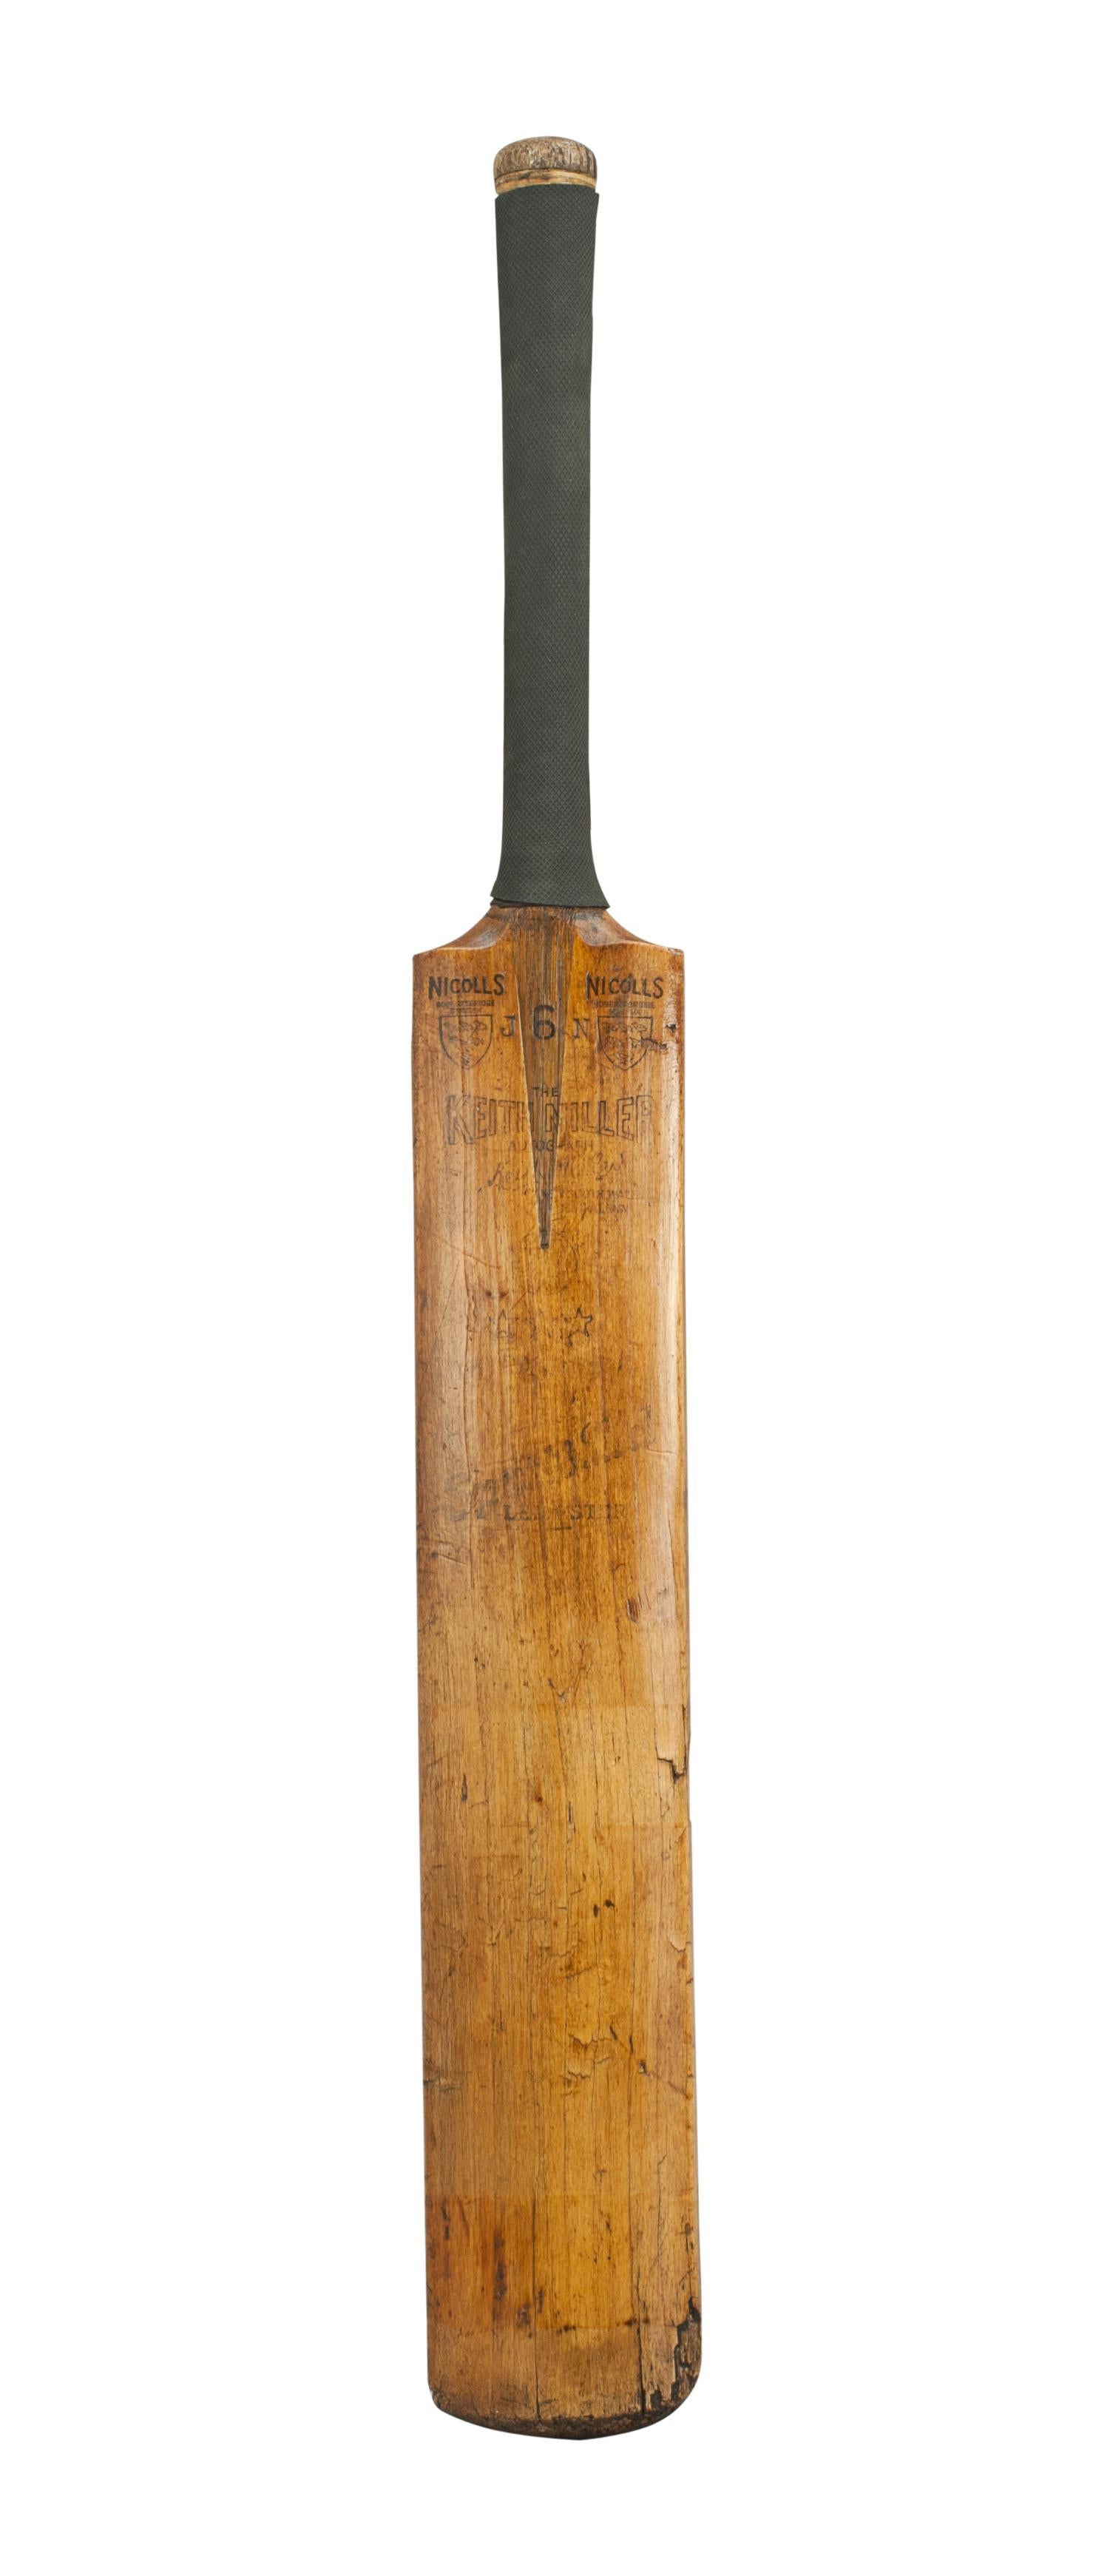 Nicolls Keith Miller Autograph cricket bat.
A fine gray Nicolls treble sprung cricket bat 'The Keith Miller Autograph'. The bat is in good condition with new rubber grip and has been adapted into a toilet roll holder. The shoulders are embossed